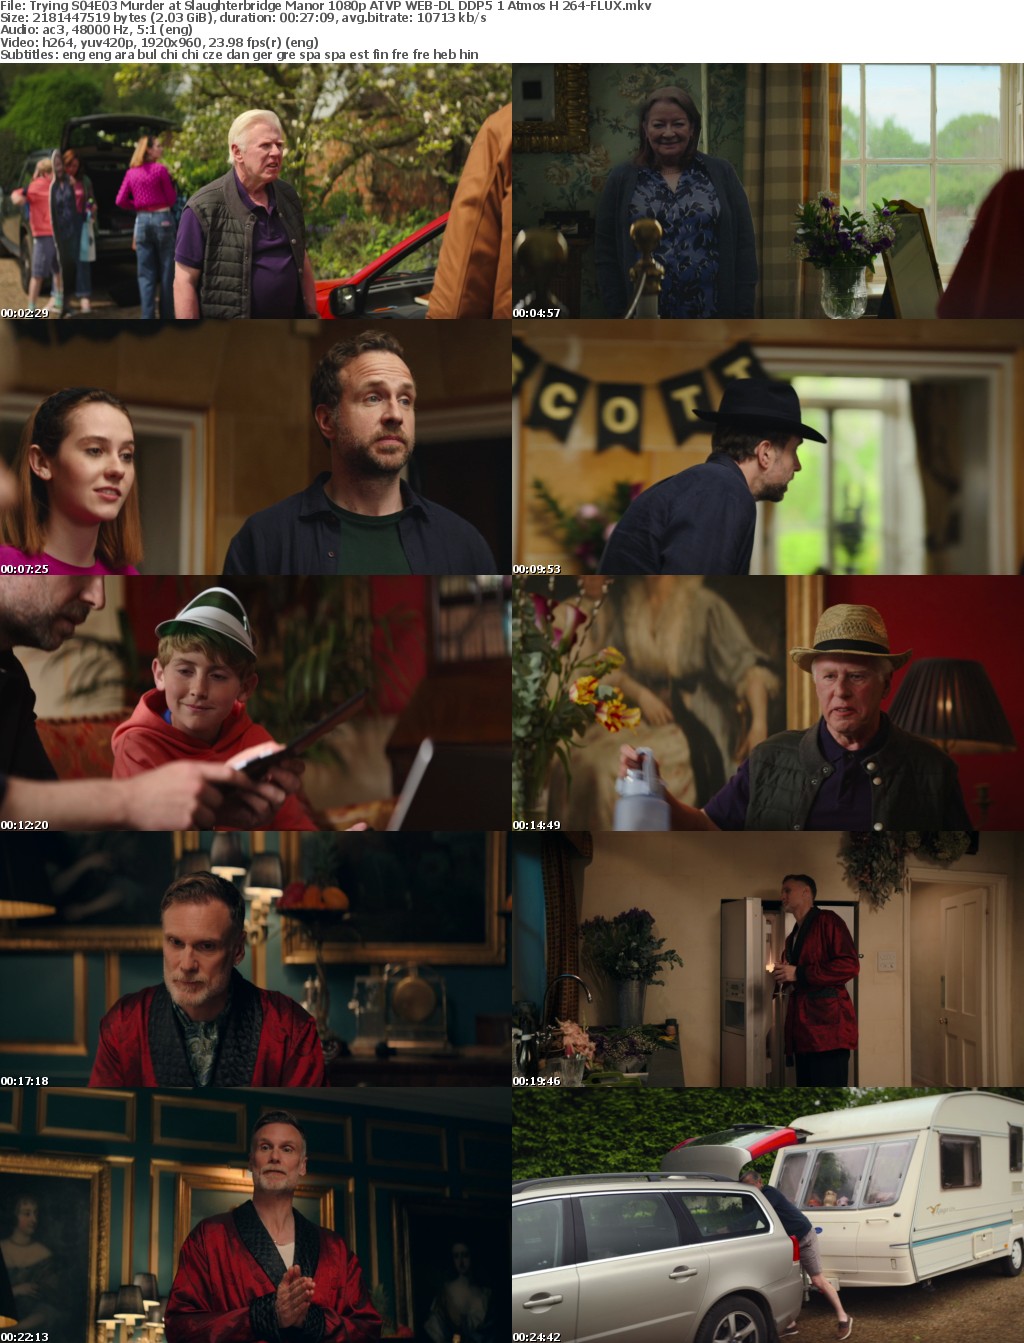 Trying S04E03 Murder at Slaughterbridge Manor 1080p ATVP WEB-DL DDP5 1 Atmos H 264-FLUX